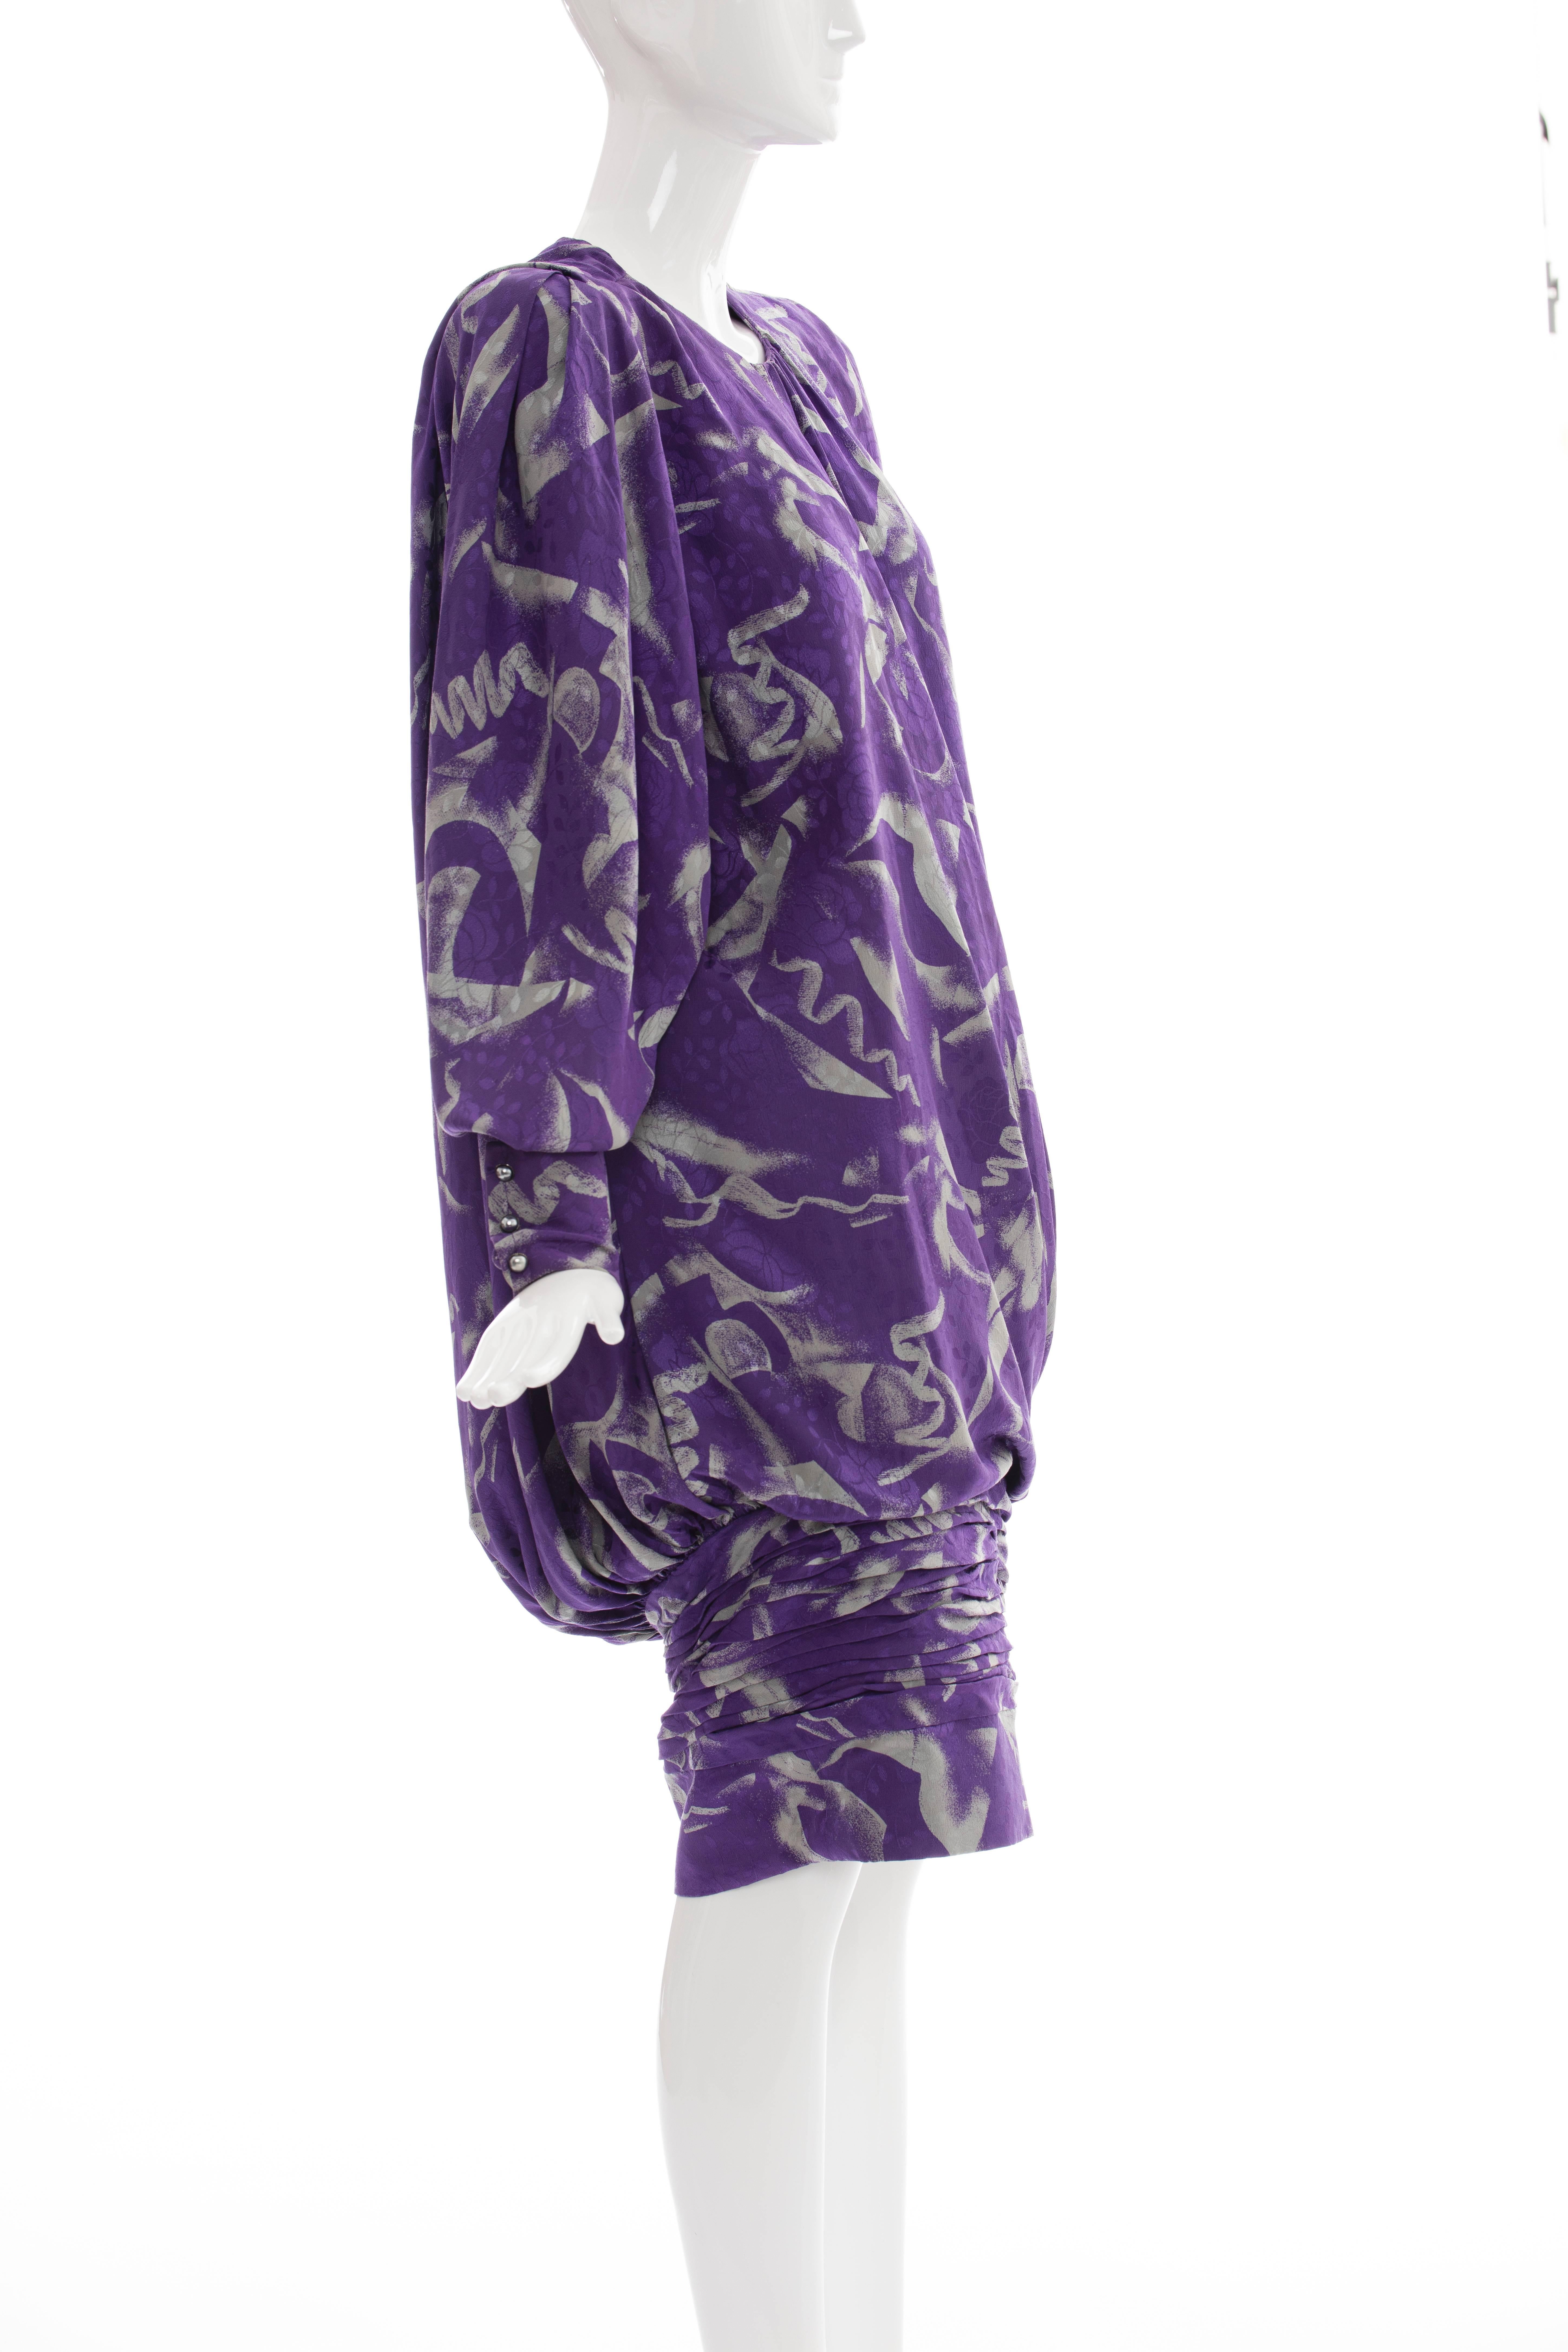 Purple Emanuel Ungaro Runway Haute Couture Balloon Collection Dress Fall, Circa: 1980's For Sale